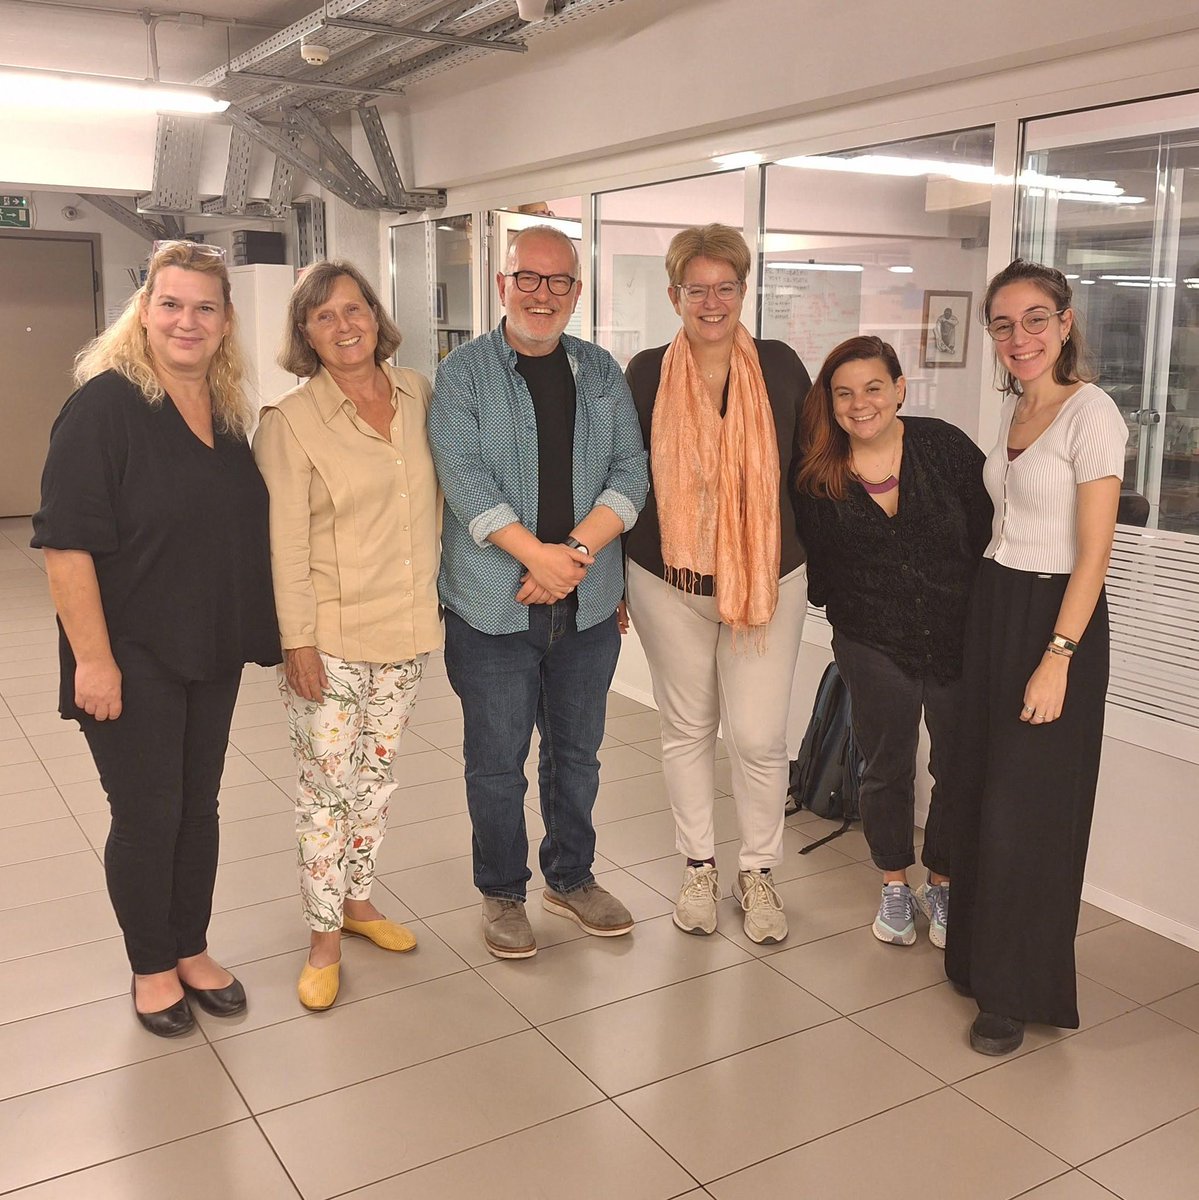 📍Athens

Family's very own Senior Programme Advisor Jonathan recently travelled to Athens for a 'summit' of refugee/migrant groups from Europe. He also met our member organisation METAdrasi, and their amazing staff.

Pictured: Irene, Lora, Ersi, Jonathan, Lara, Maria-Eleni 👏🏼